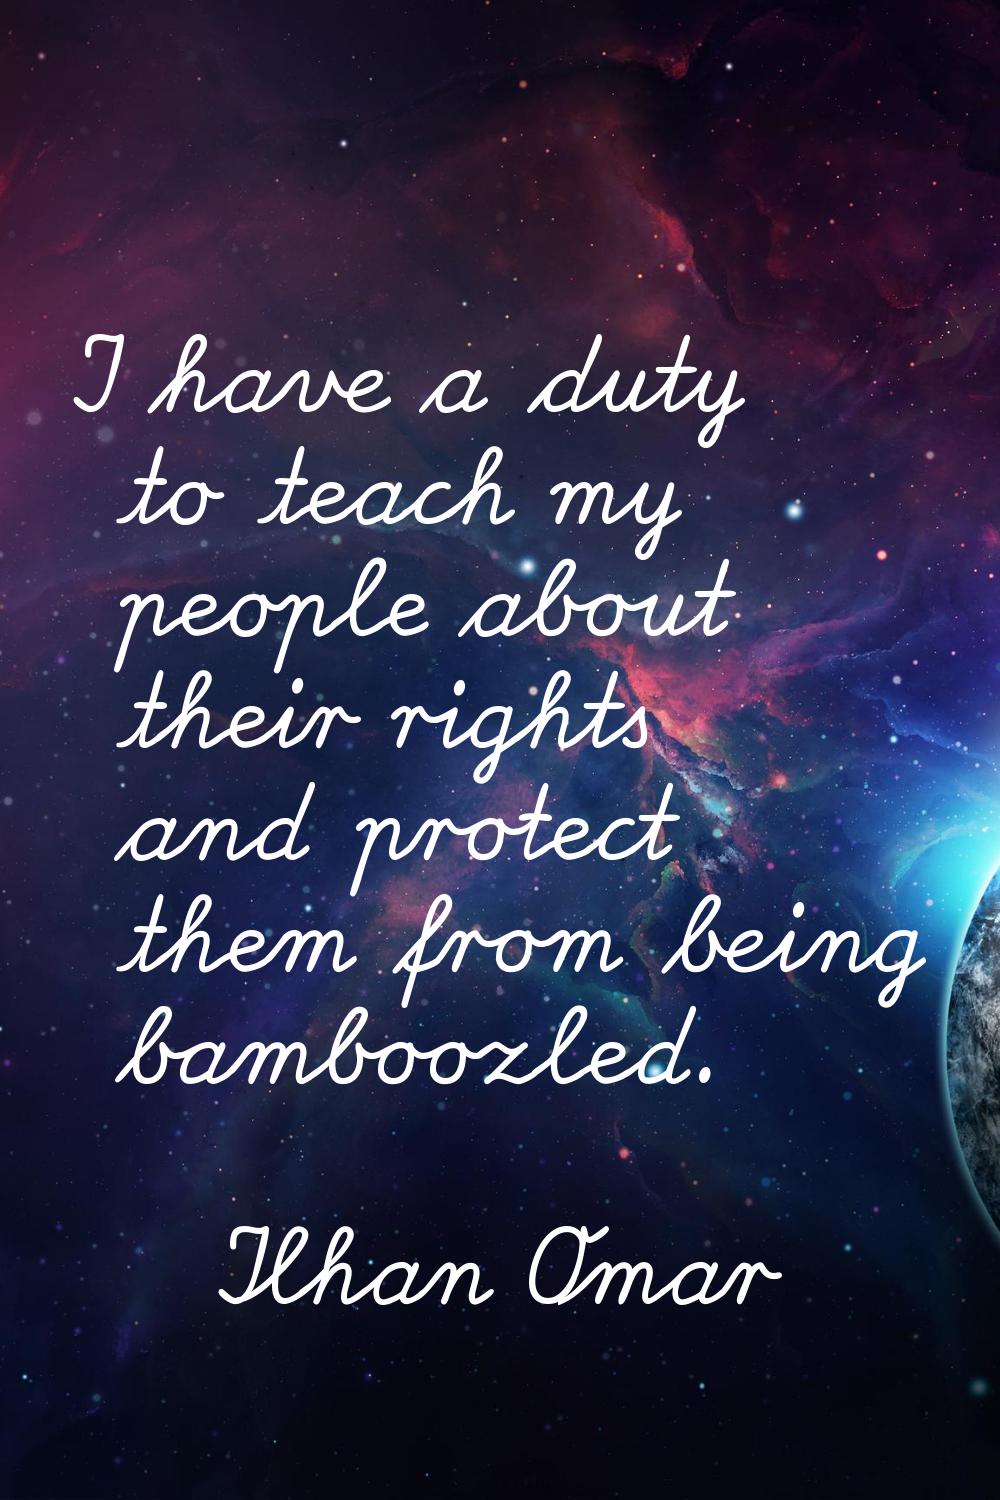 I have a duty to teach my people about their rights and protect them from being bamboozled.